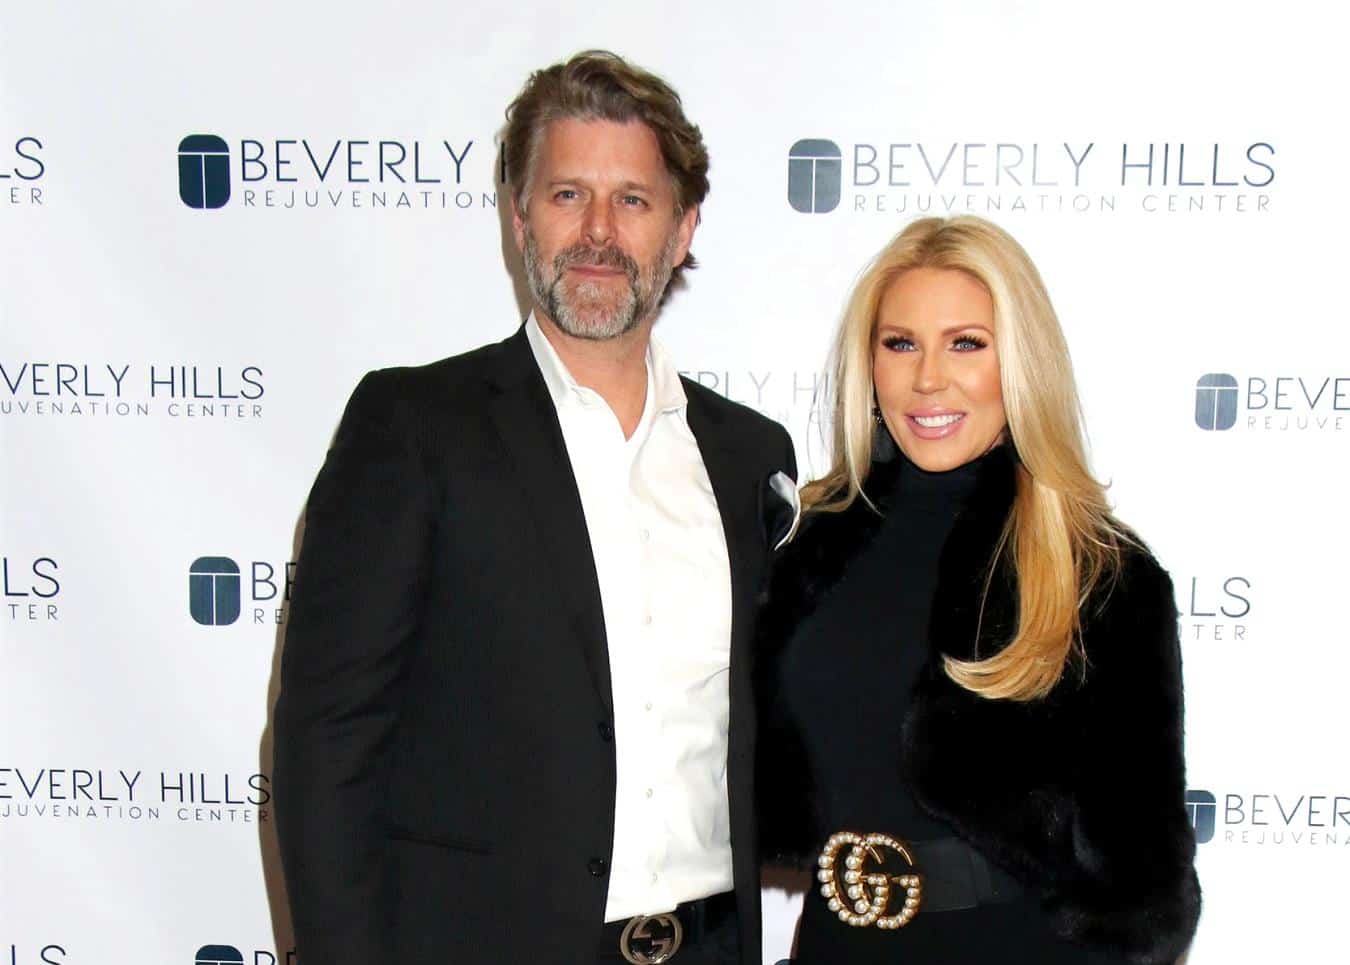 Gretchen Rossi and Slade Smiley Accused of Selling False CBD Products.